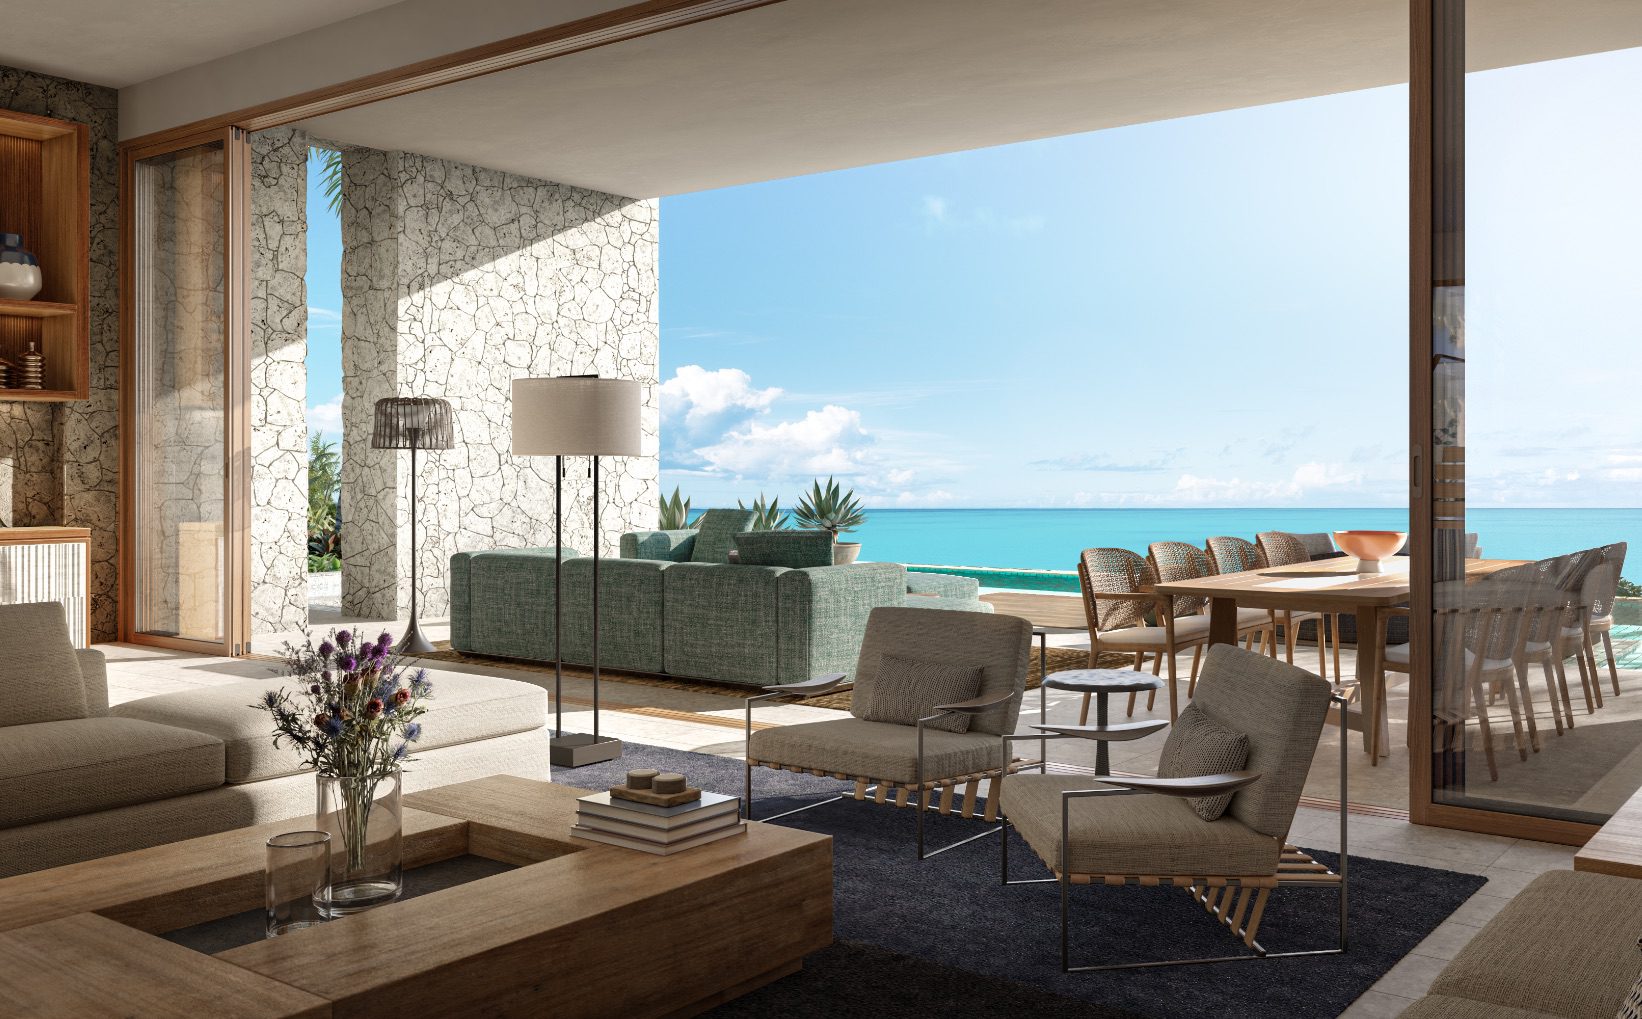 The Strand Turks and Caicos - Grand oceanfront real estate